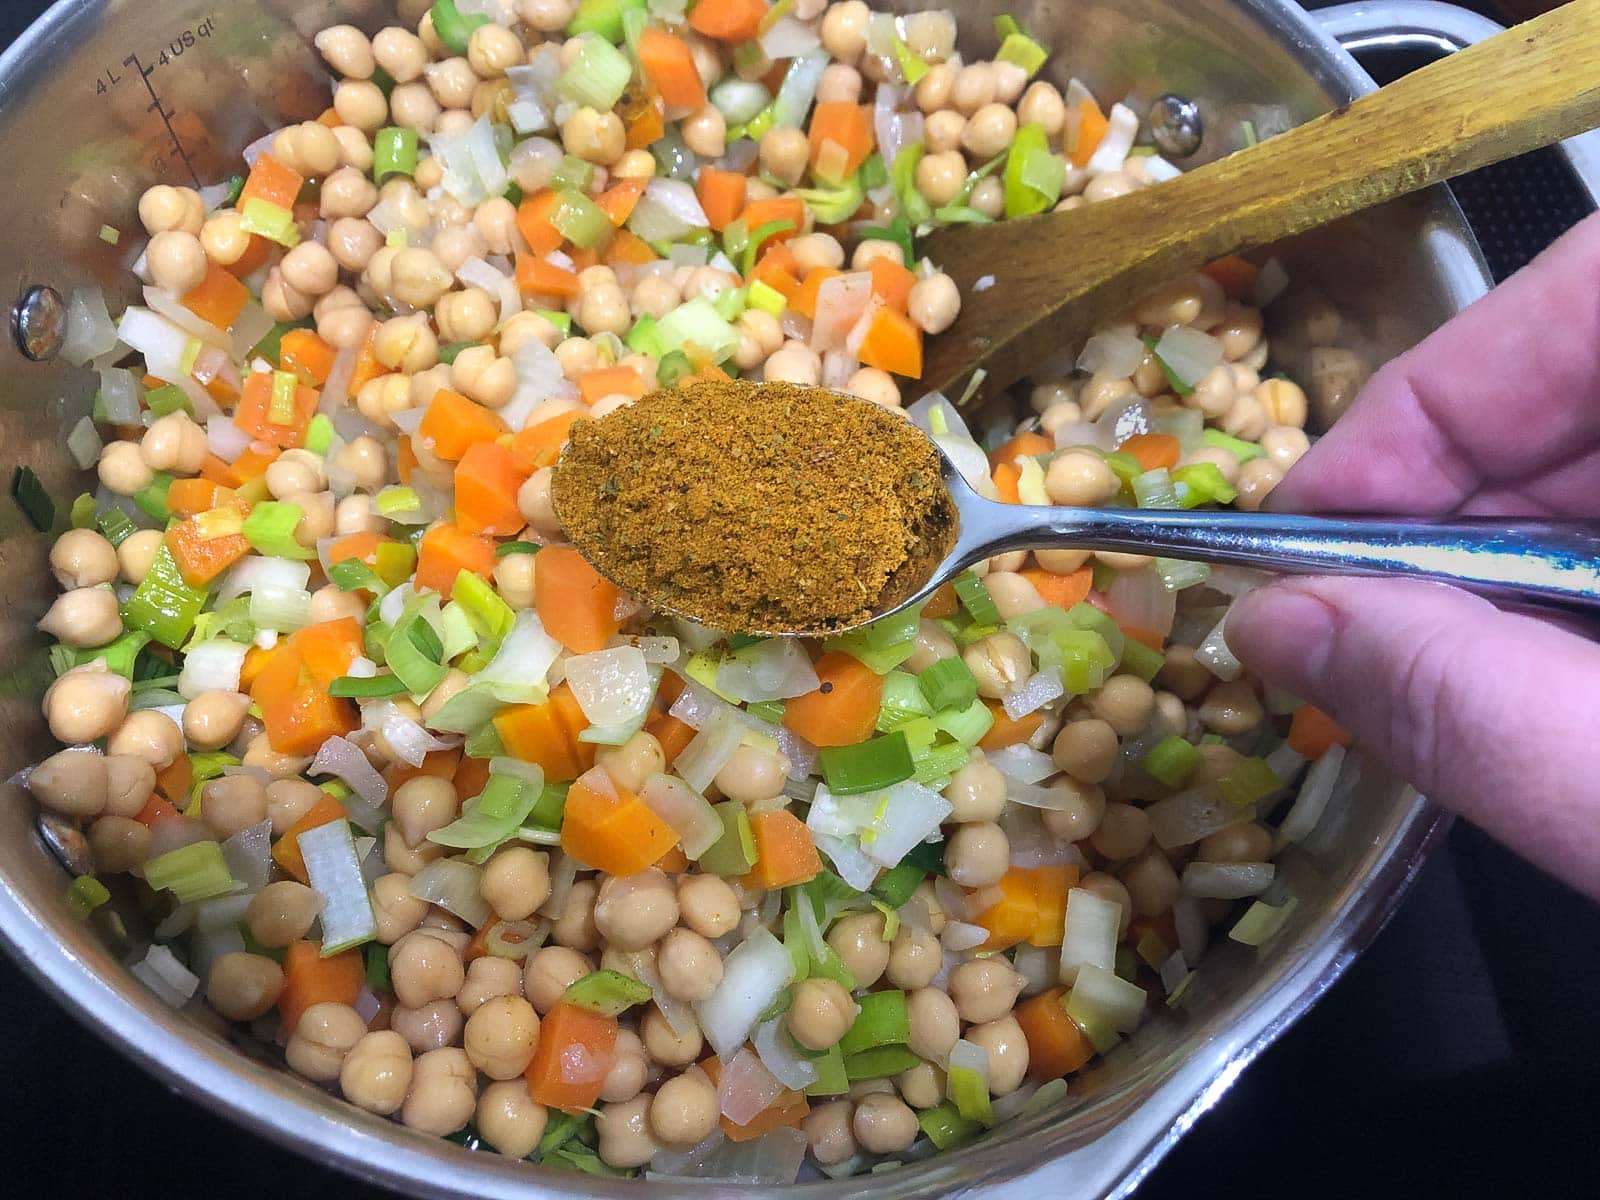 A hand adding a spoon of dried curry powder to sauteed vegetables and chickpeas.